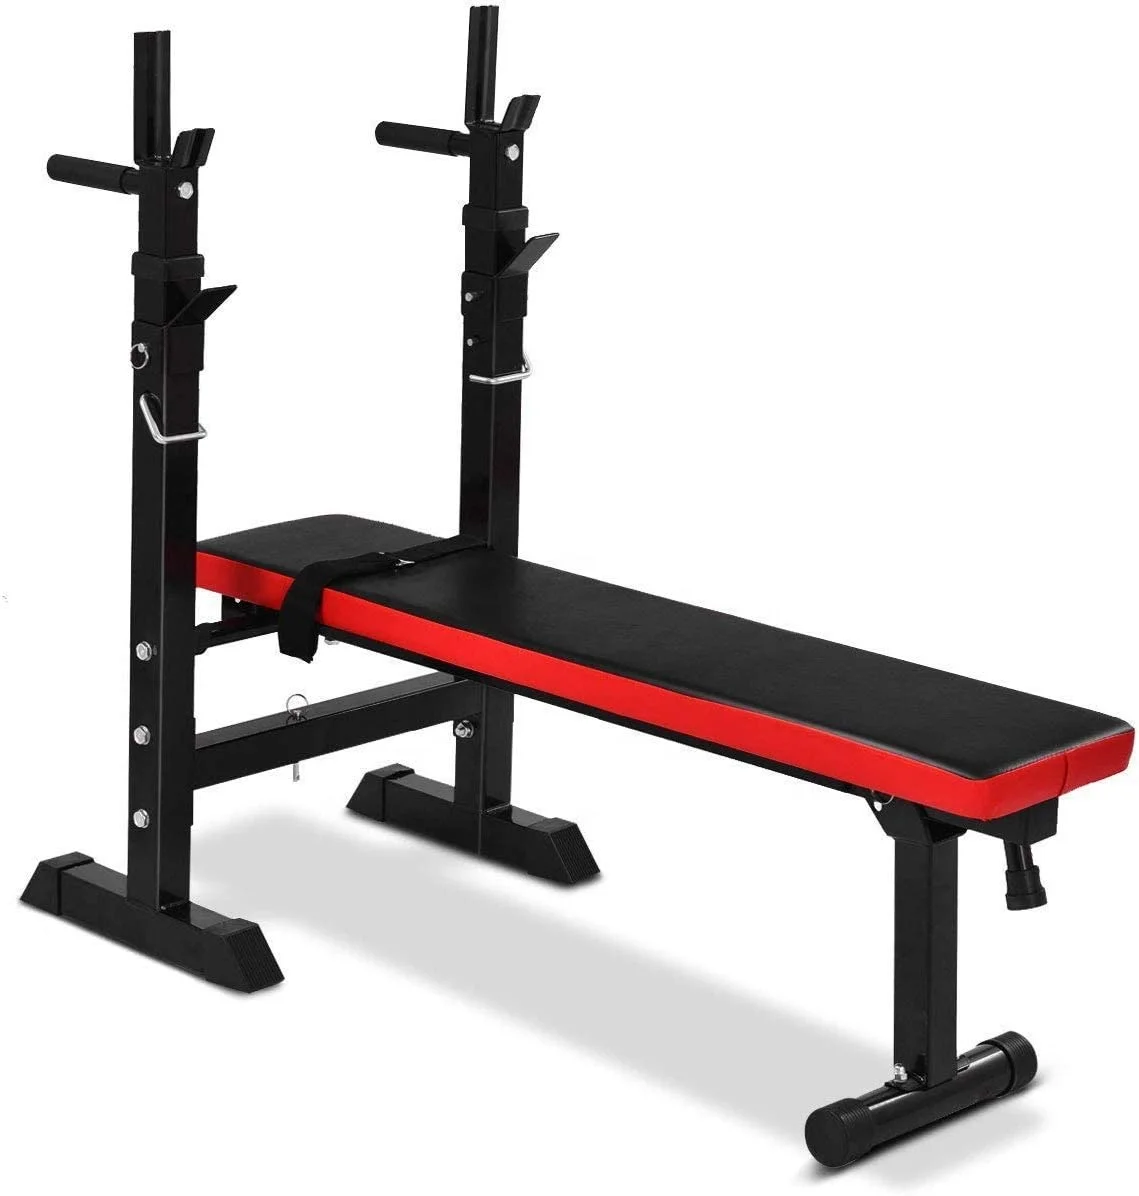 Adjustable Weight Bench With Barbell Rack Folding Lifting Bench For Full Body Exercise Foldable Weight Bench Buy Fitness Weight Bench With Height Adjustable Weight Bench Gym Equipment Adjustable Bench Benches Bench